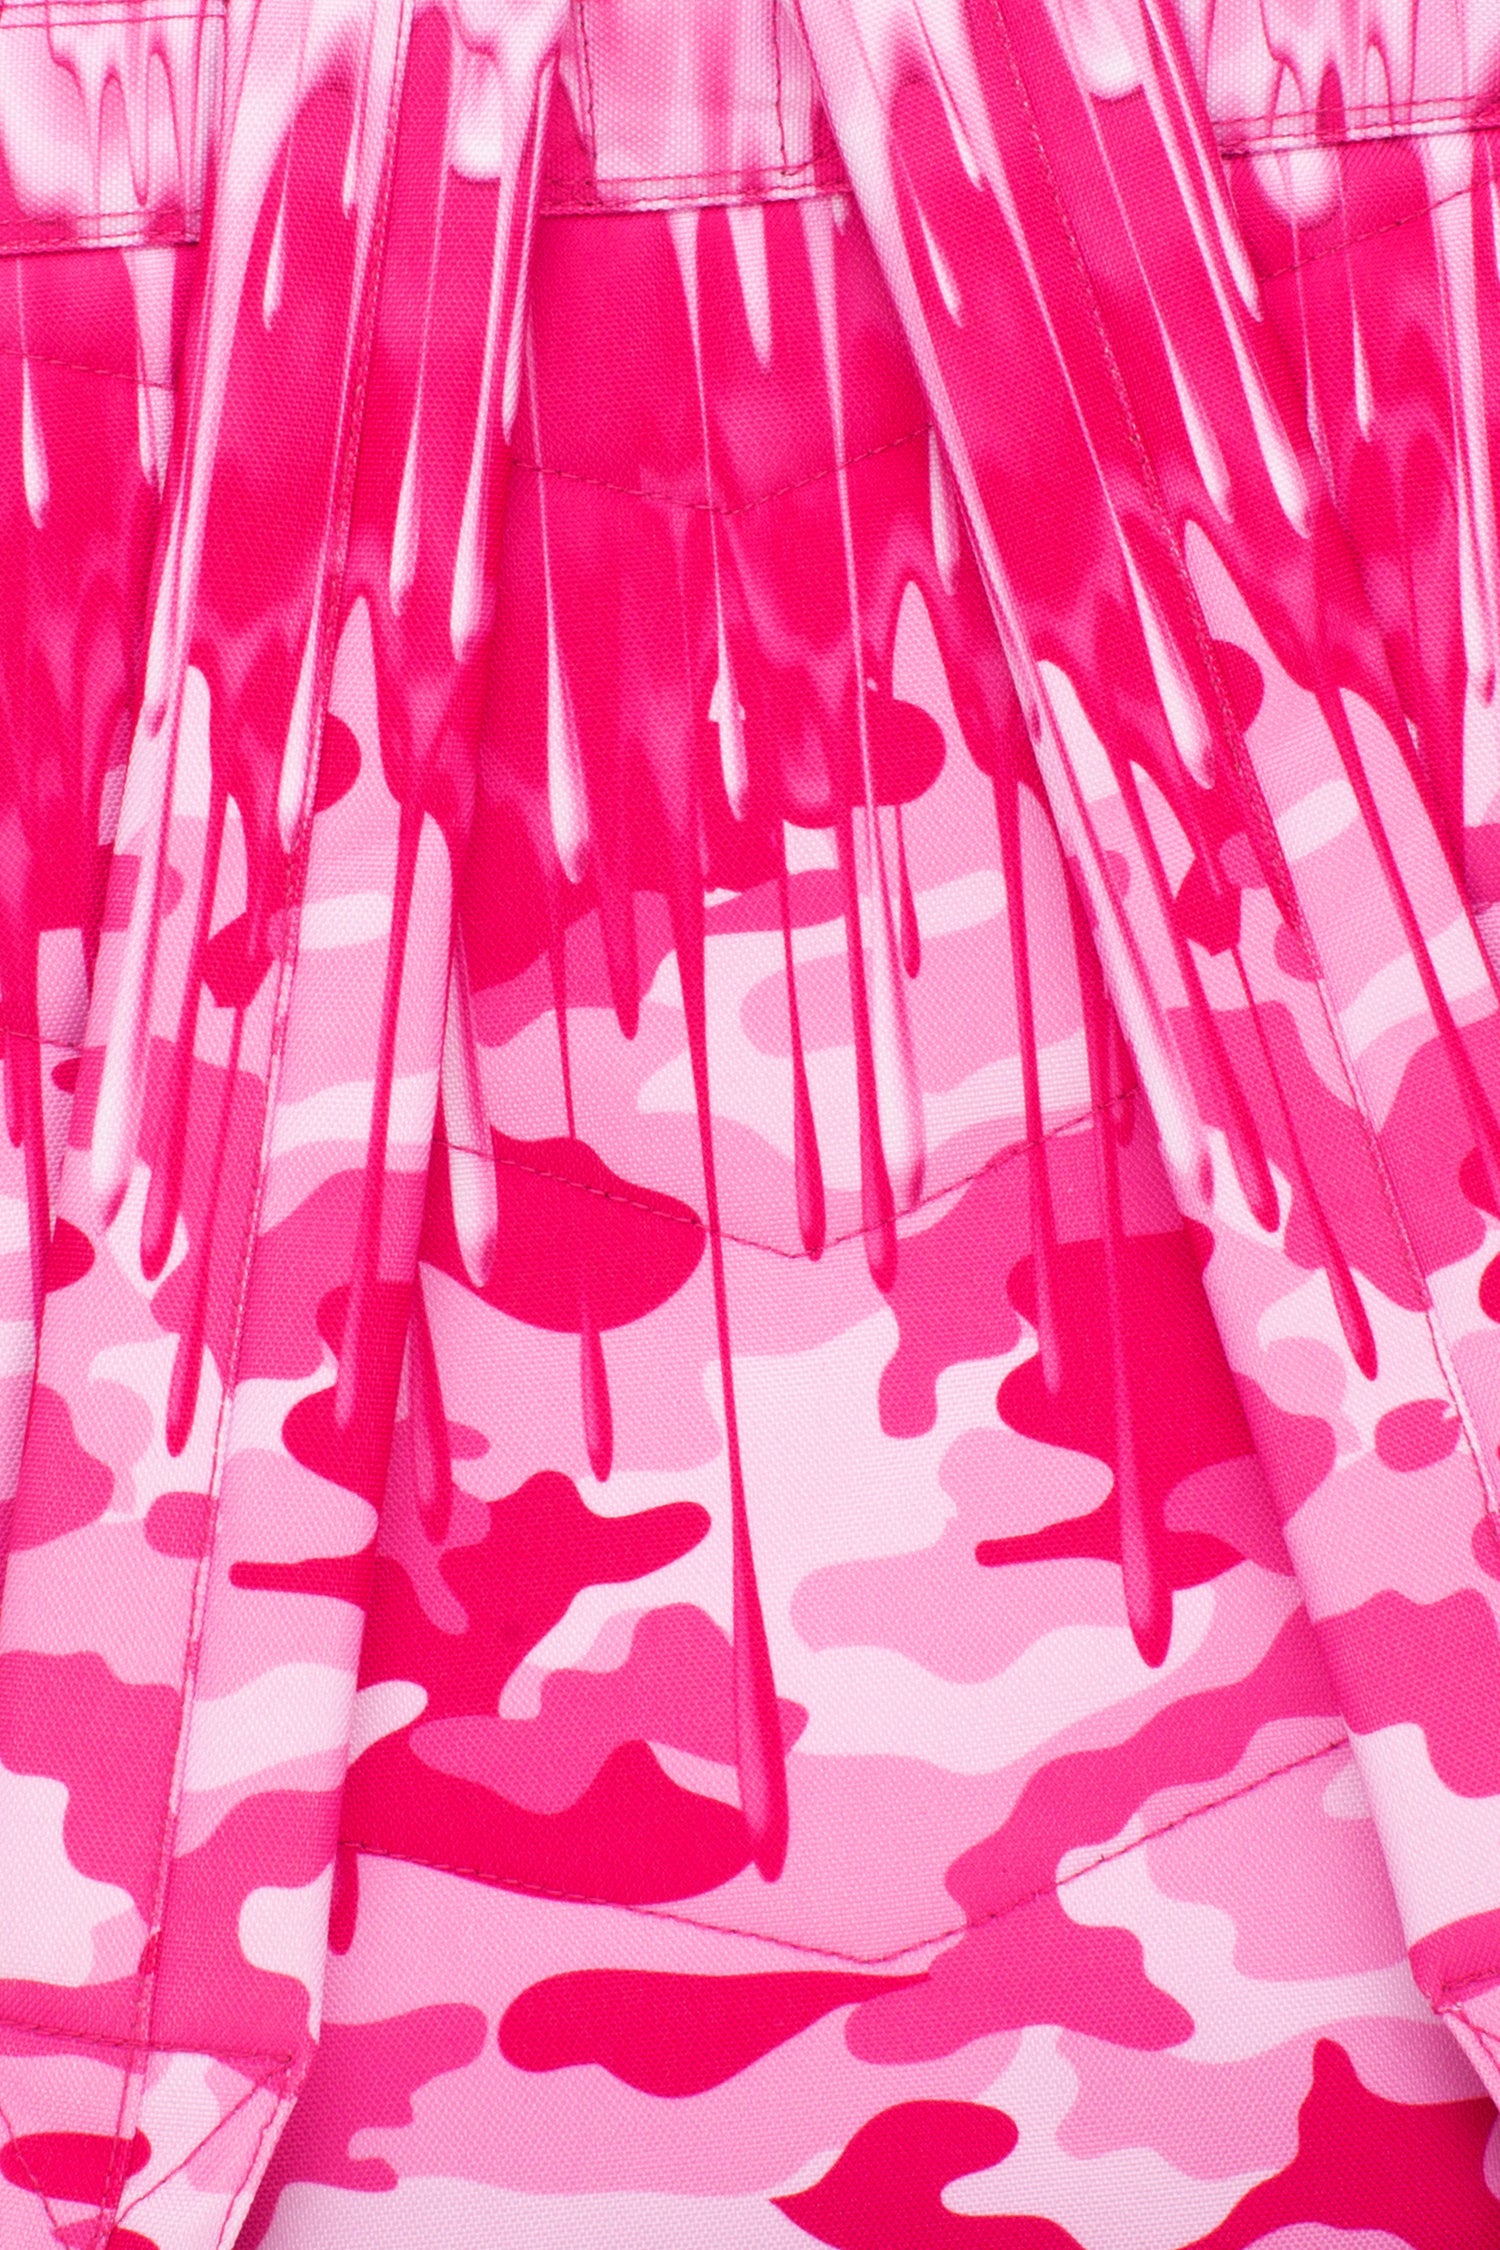 HYPE PINK CAMO SLIME DRIPS BACKPACK